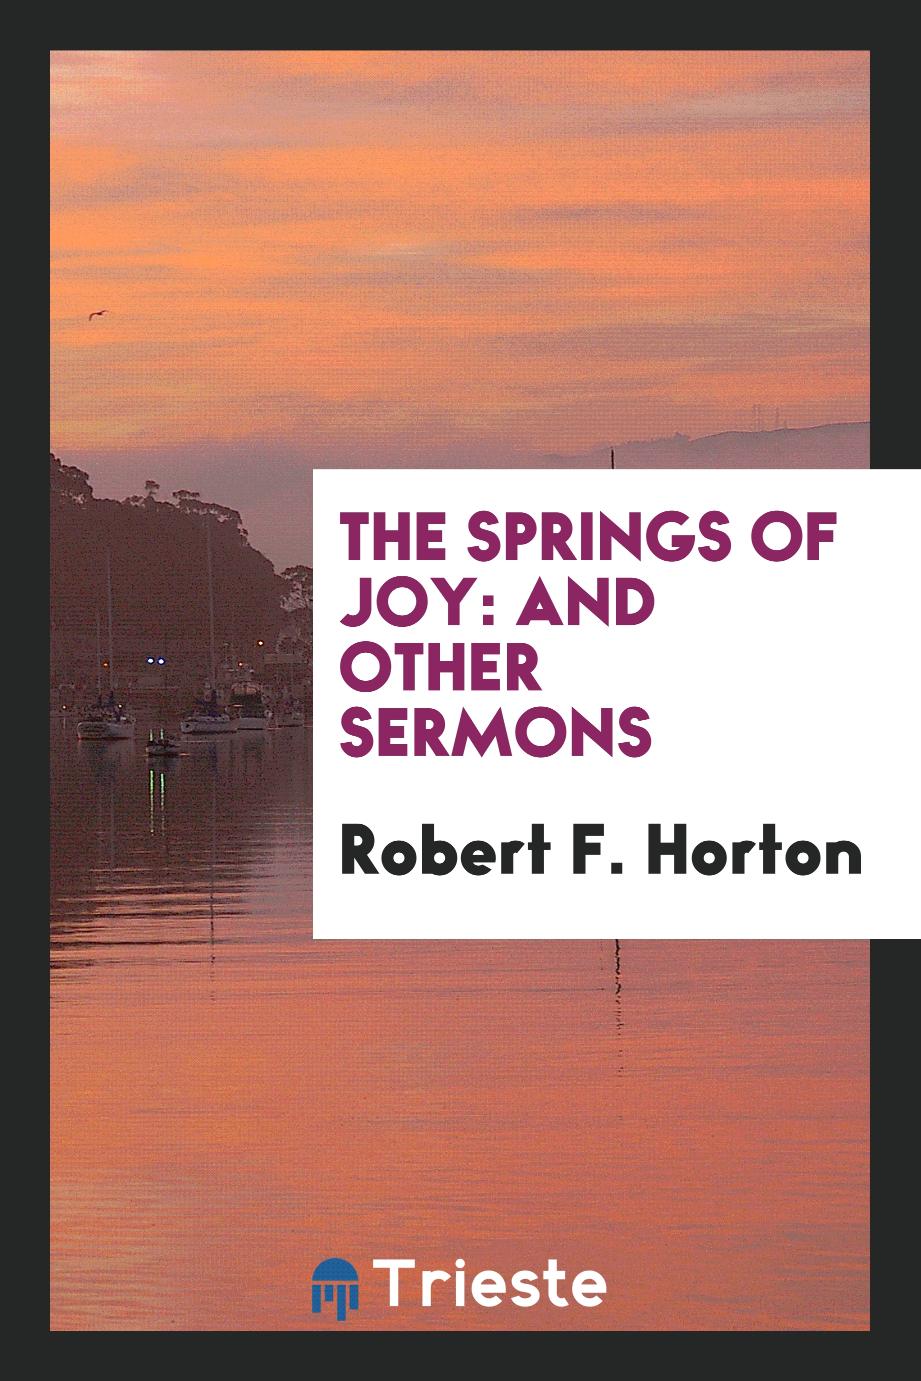 The Springs of Joy: And Other Sermons